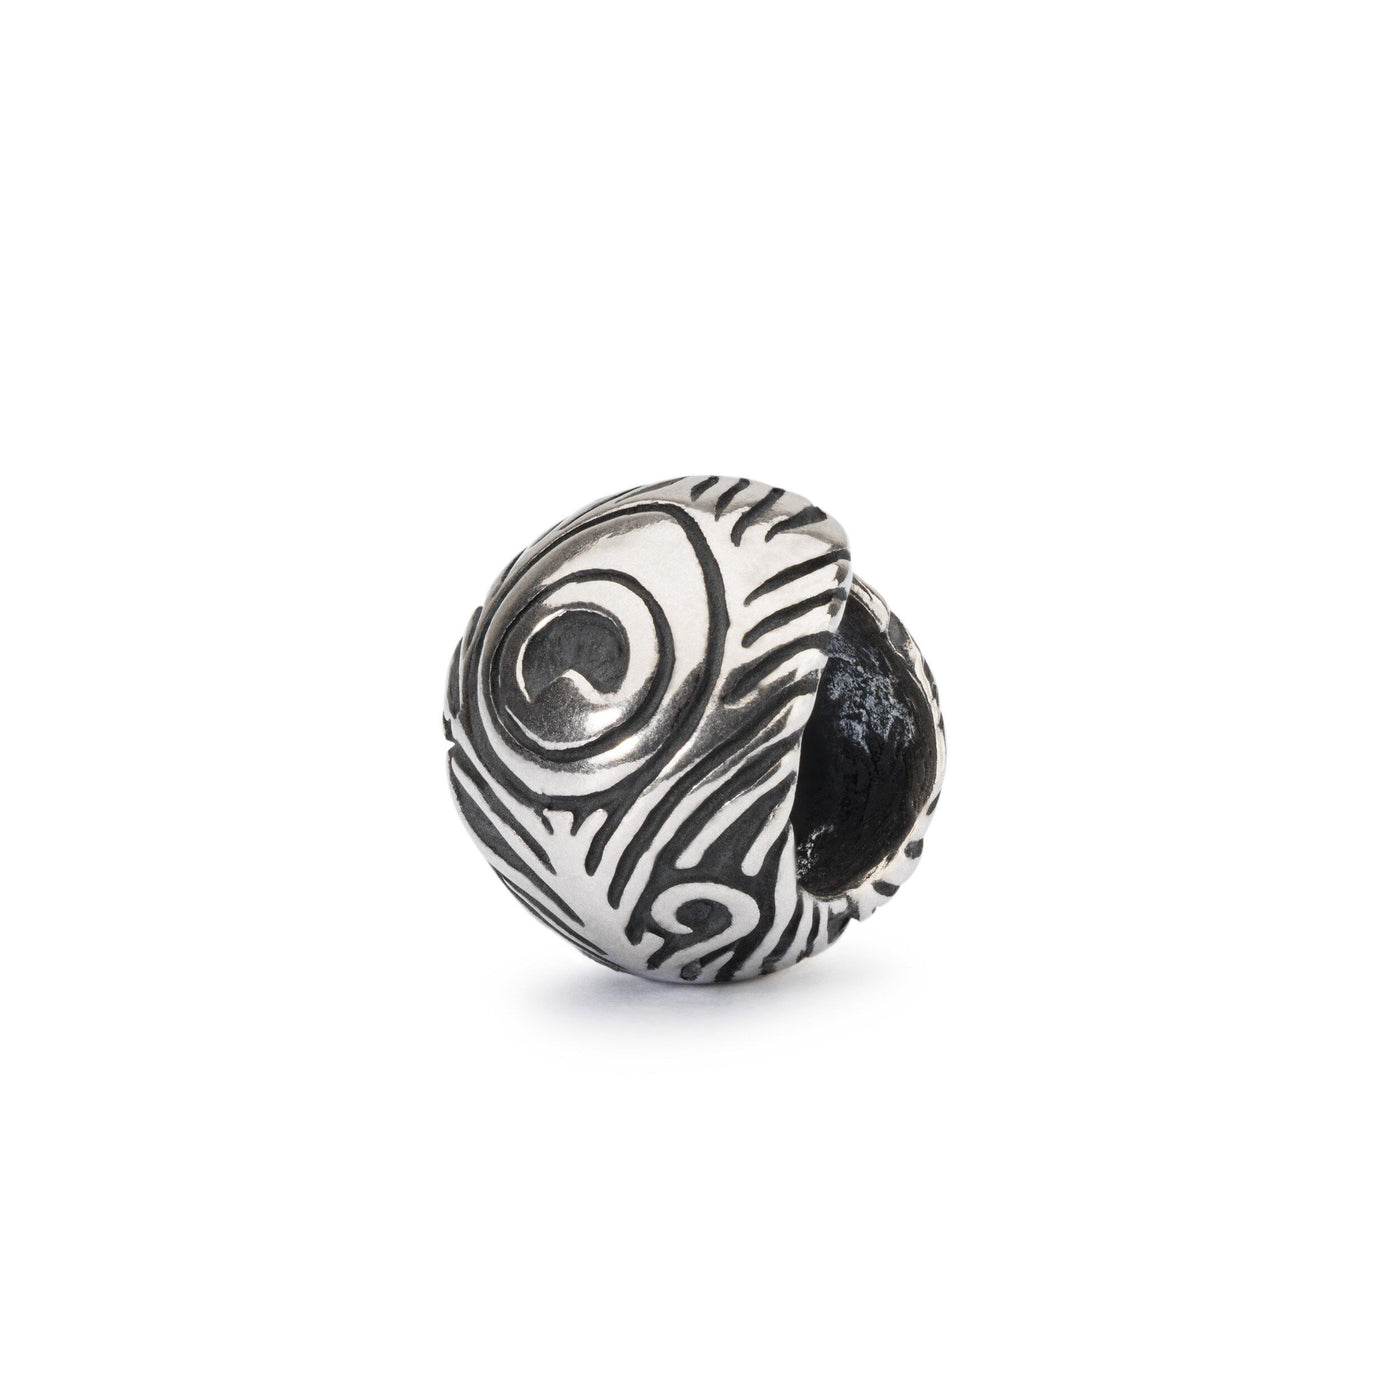 Peacock Feather - Trollbeads Canada